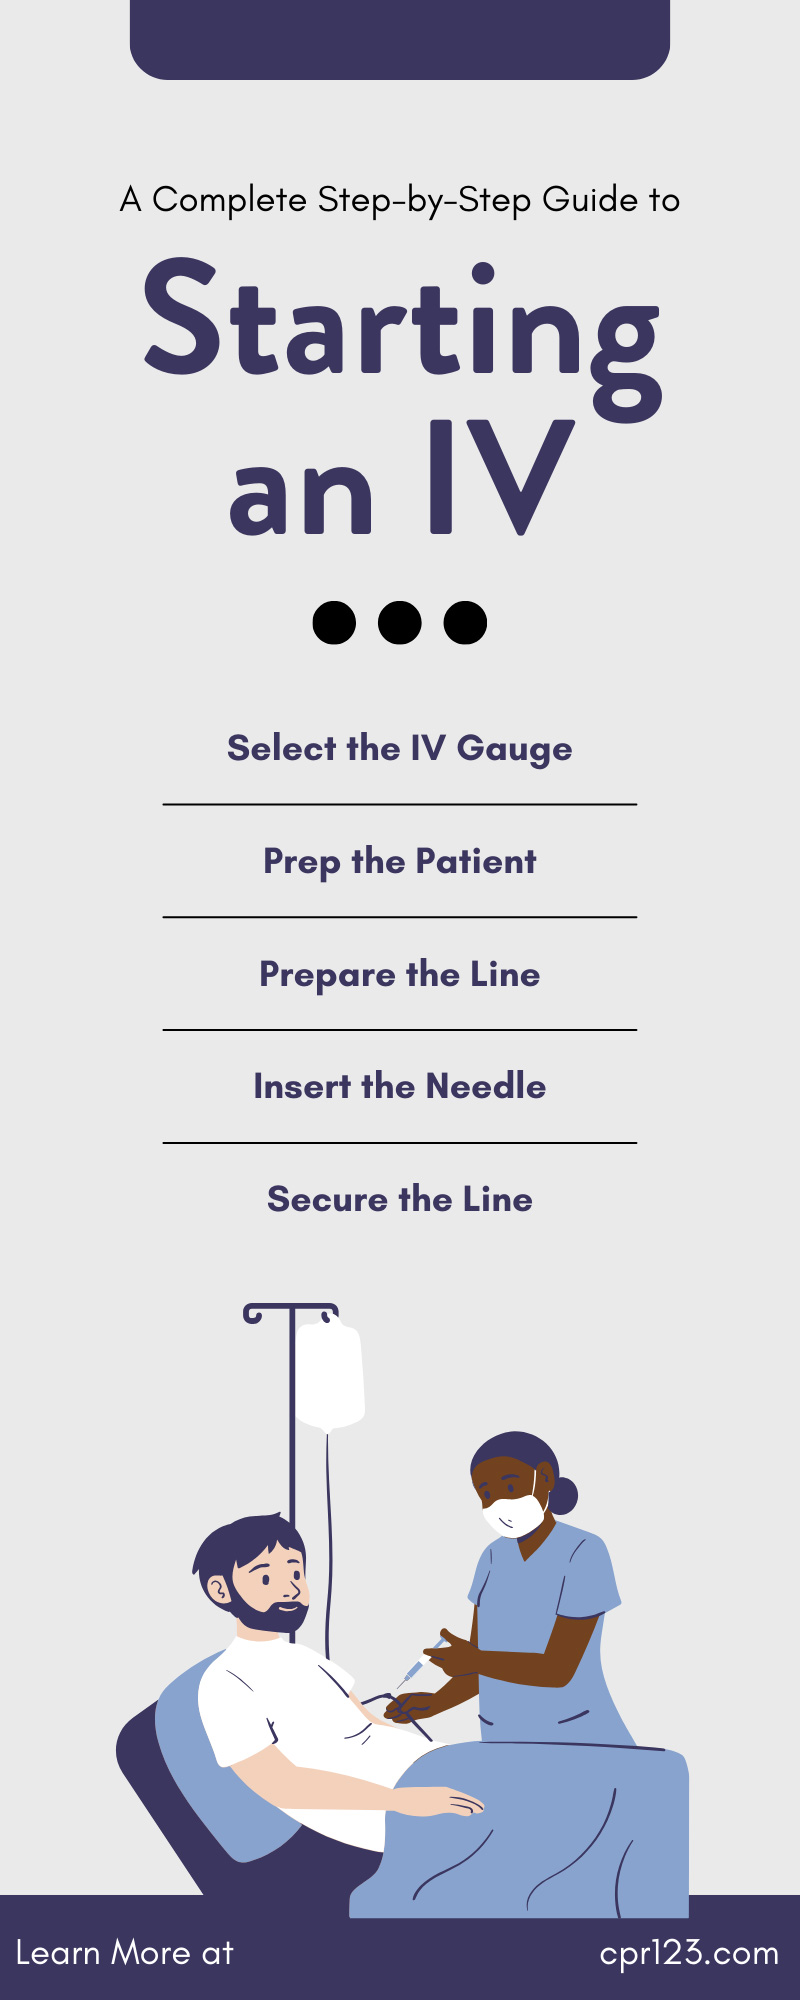 A Complete Step-by-Step Guide to Starting an IV